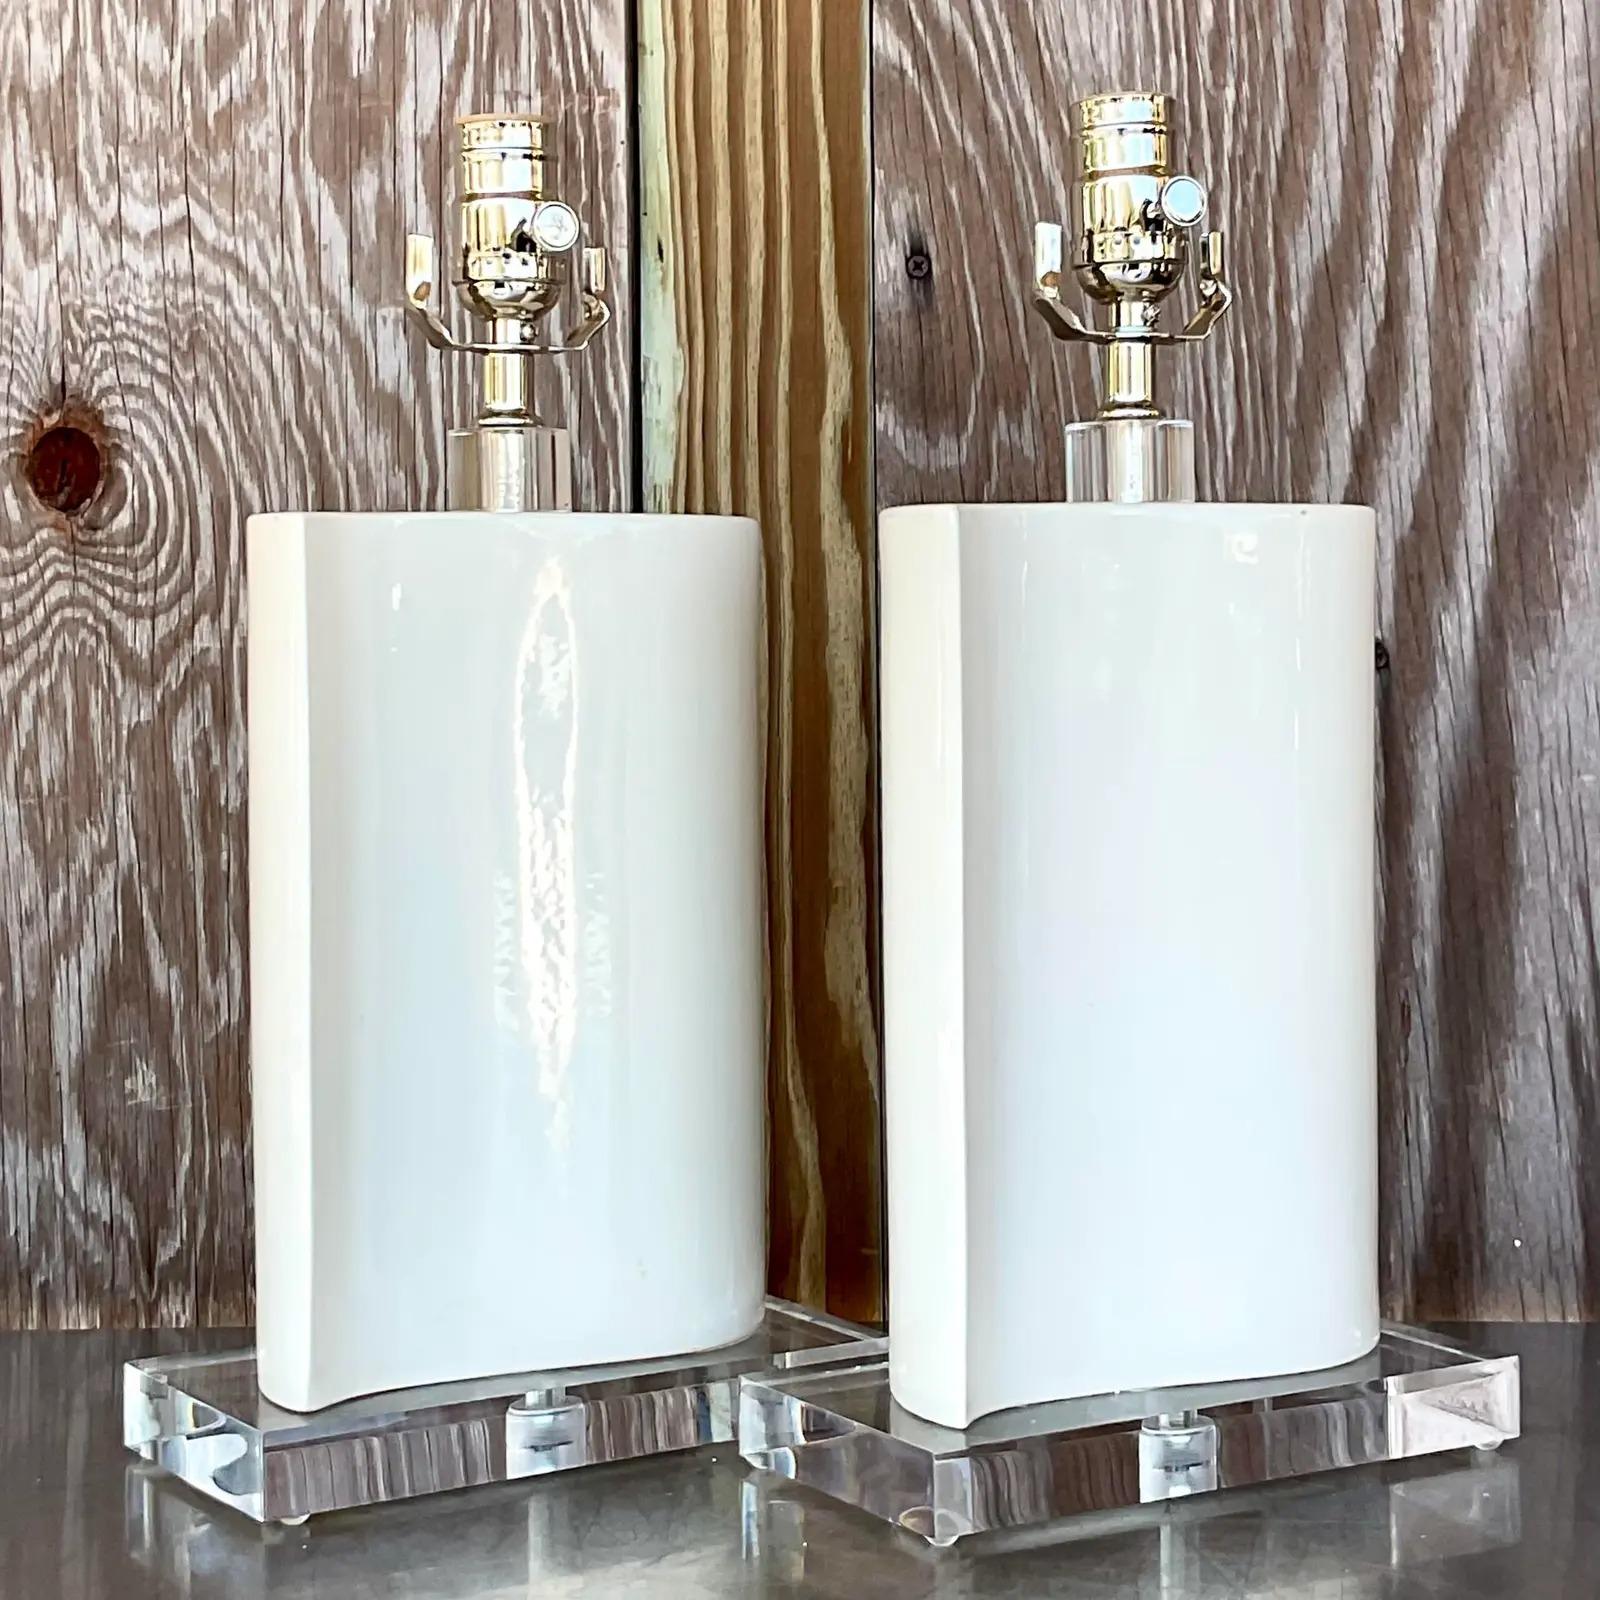 North American Vintage Boho Glazed Ceramic Wave Lamps - a Pair For Sale